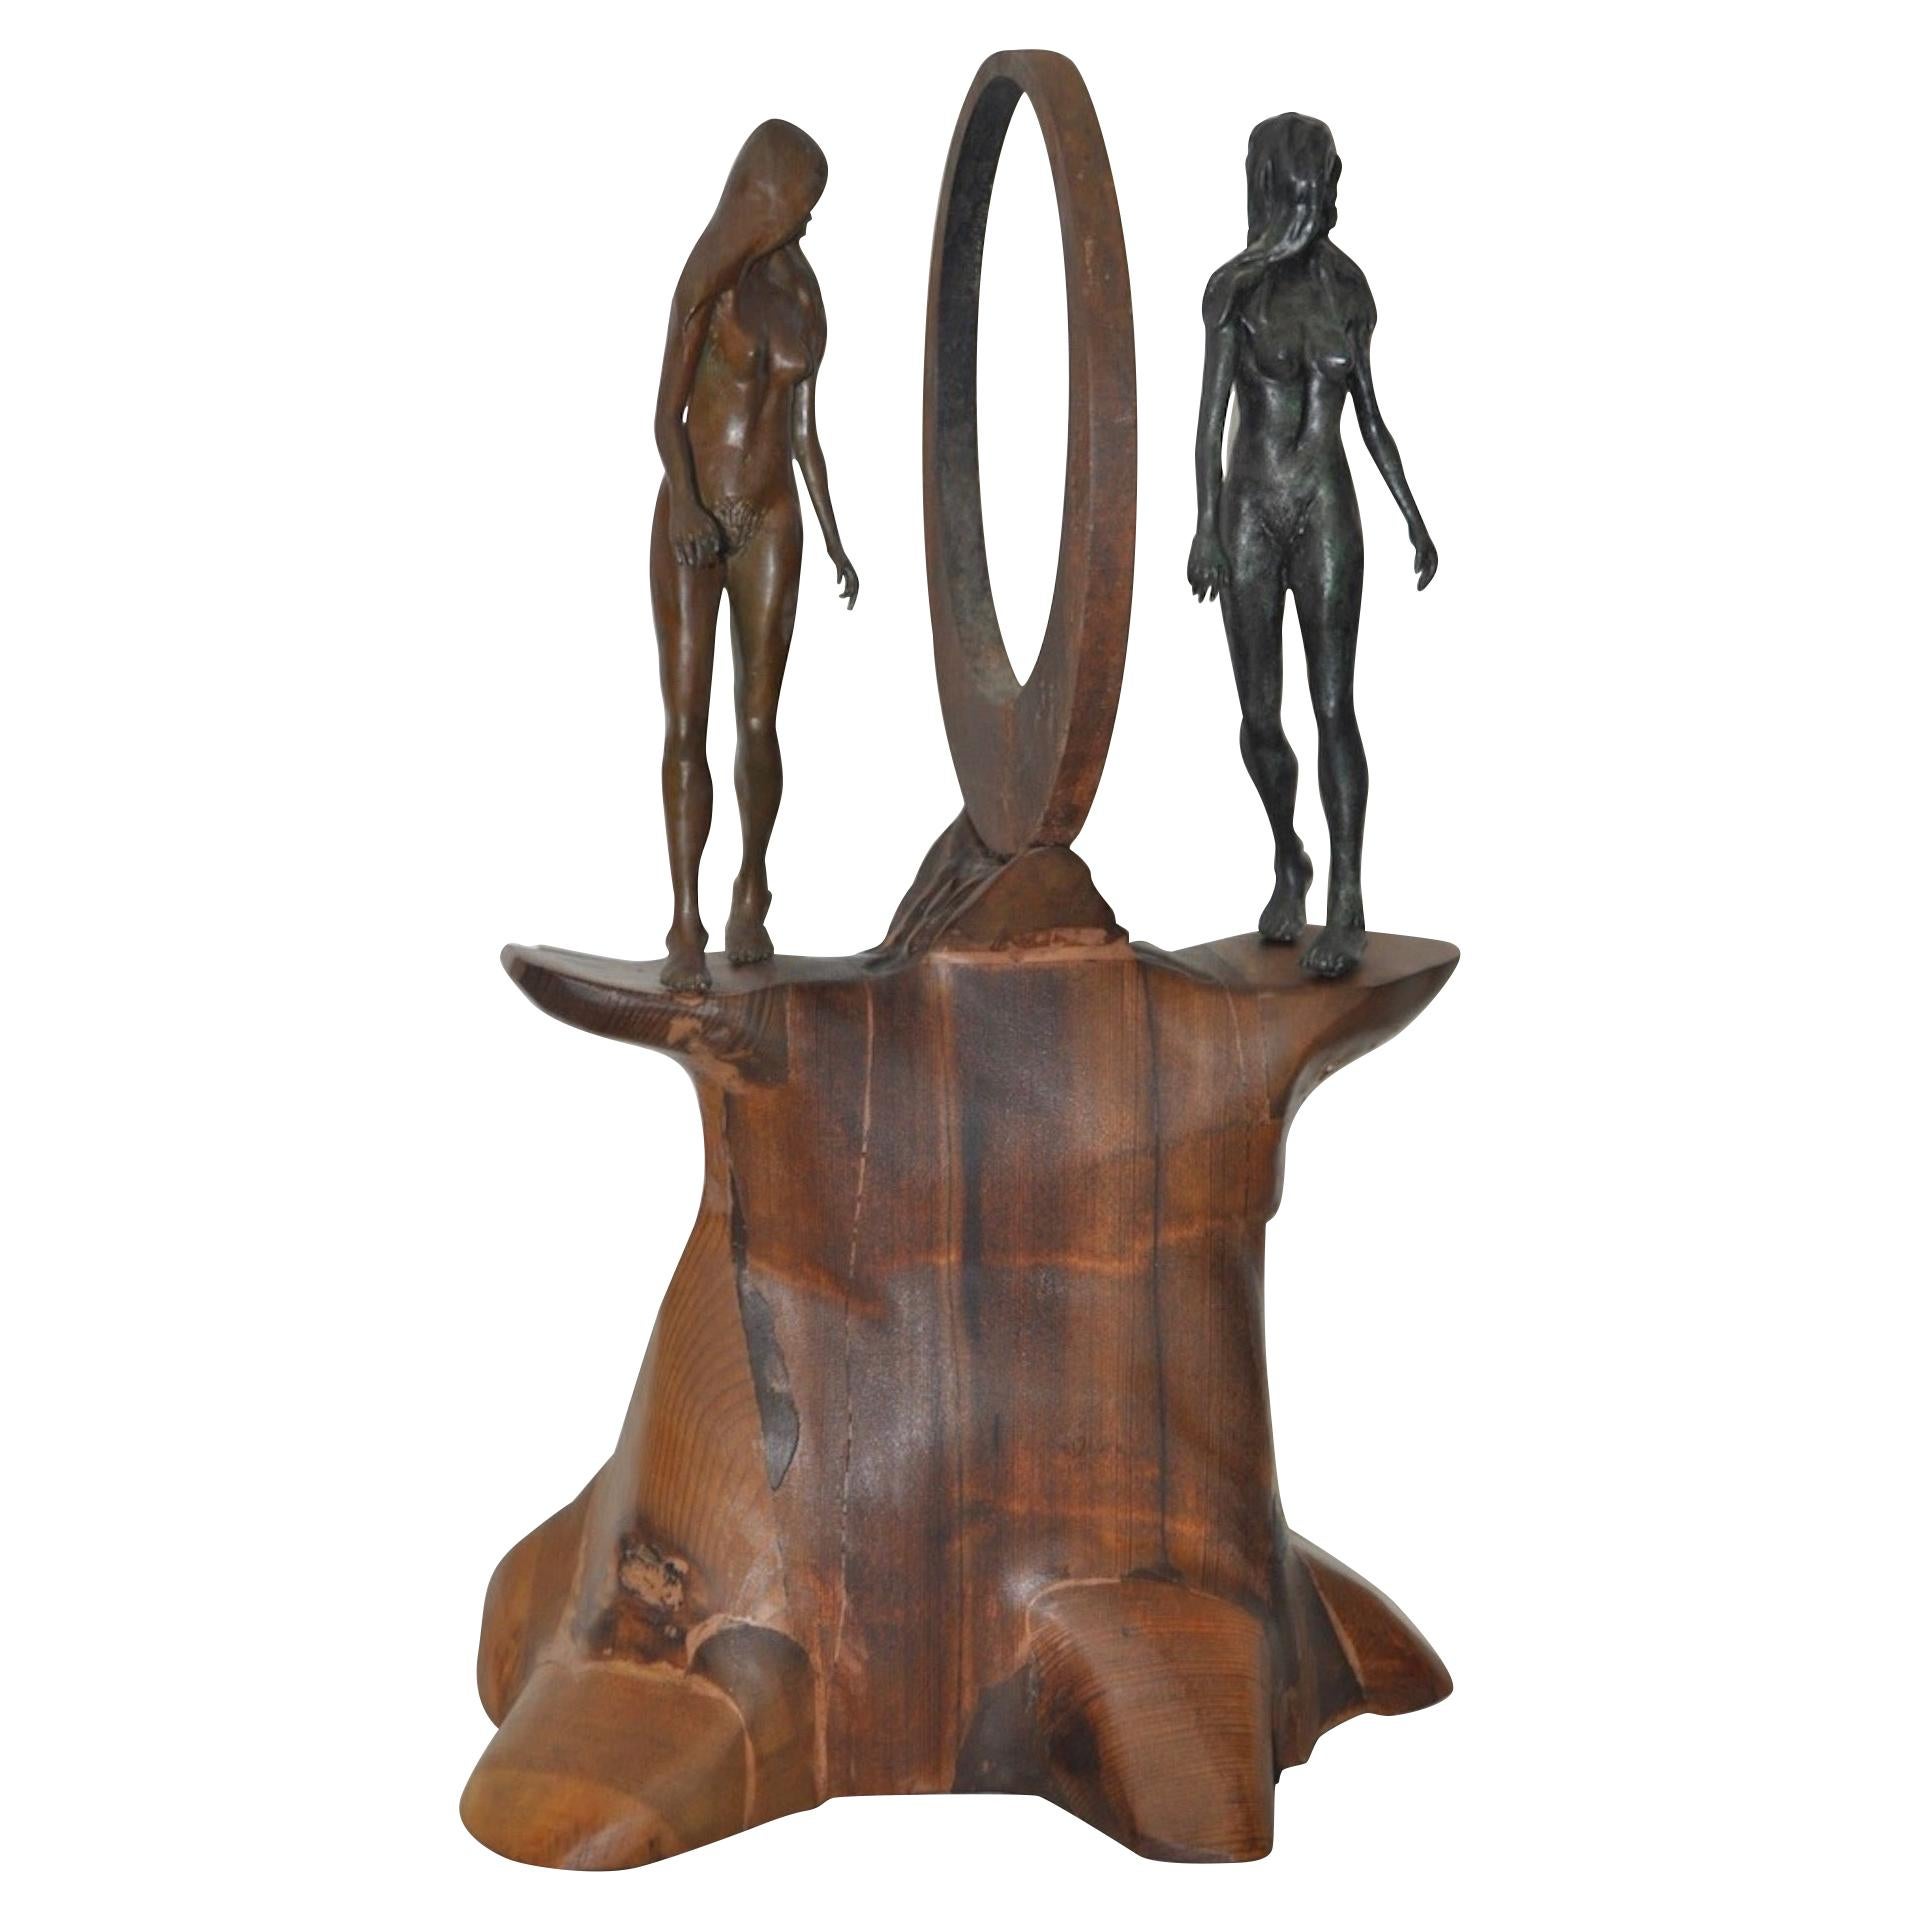 Vintage Figural Nude Bronze, Wrought Iron and Wood Sculpture circa 1960s-1970s